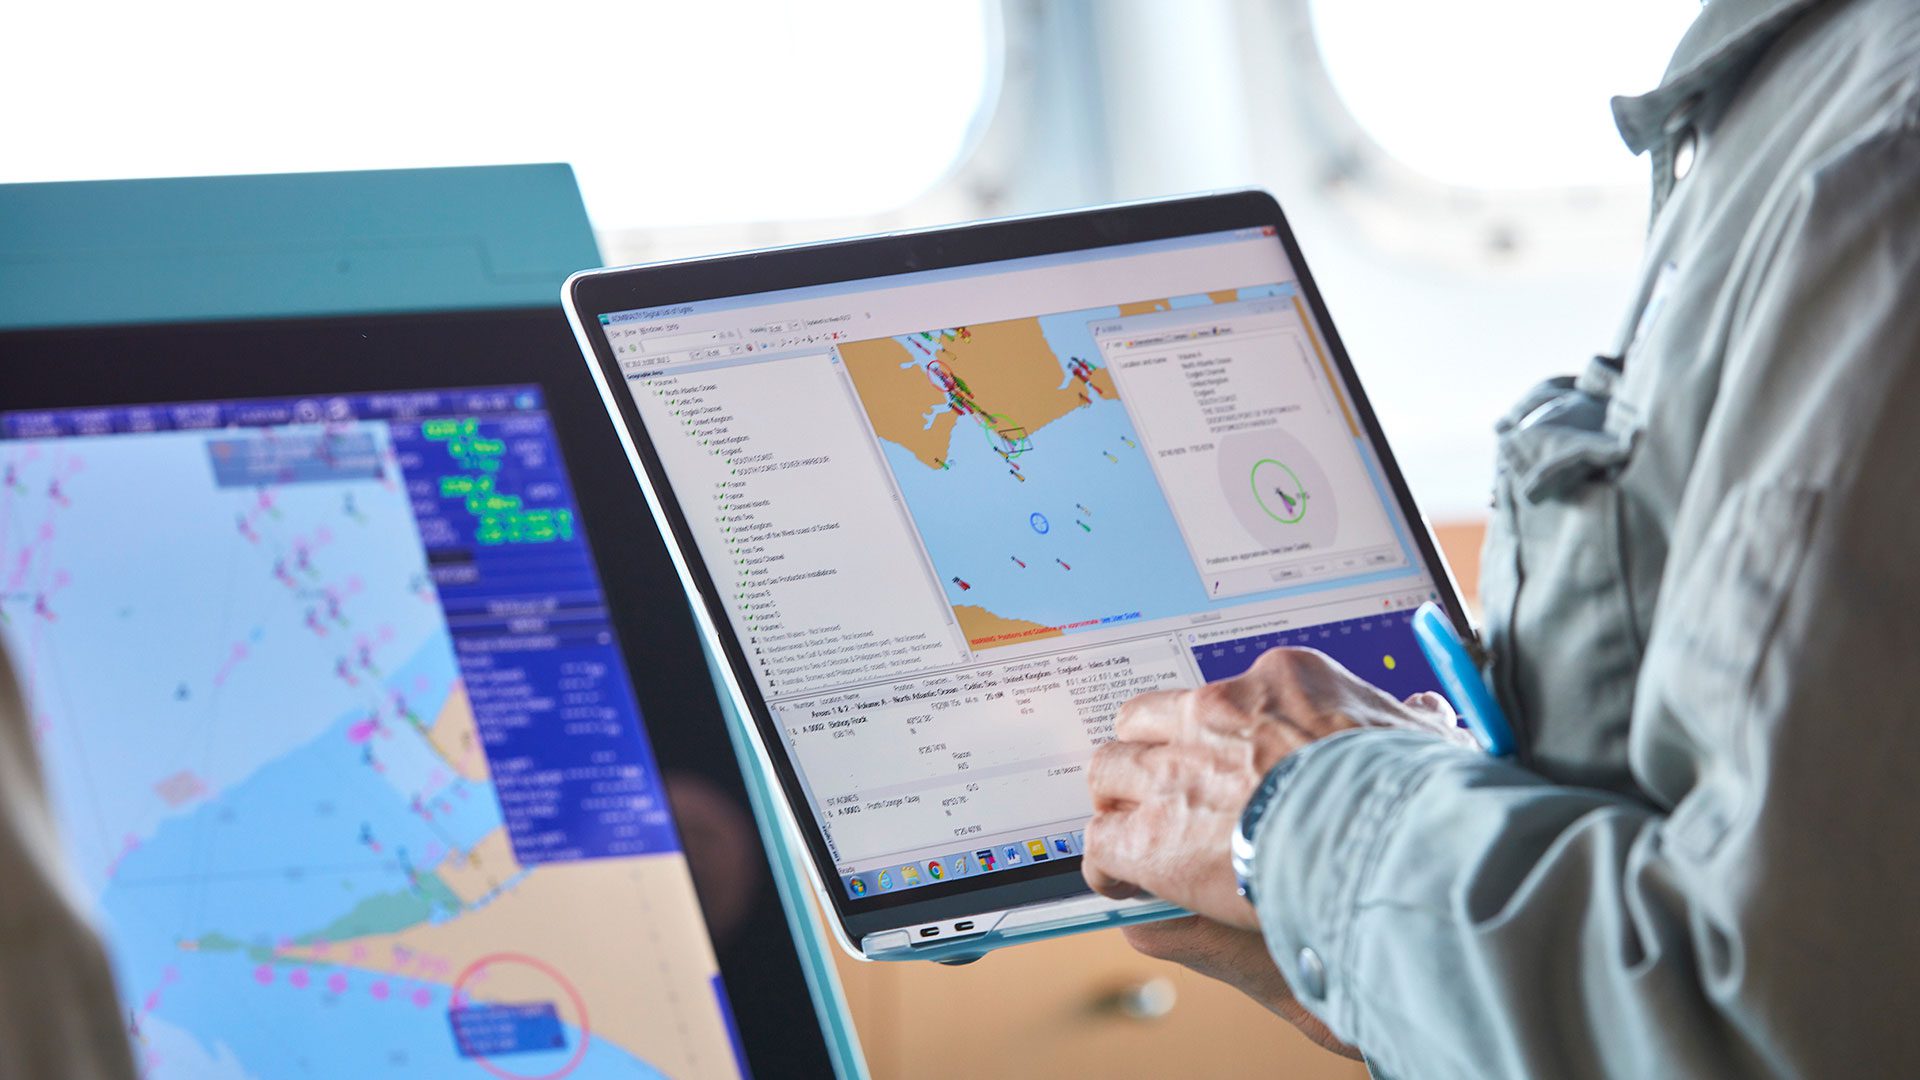 Going Digital: UKHO to Phase Out Traditional Paper Nautical Charts